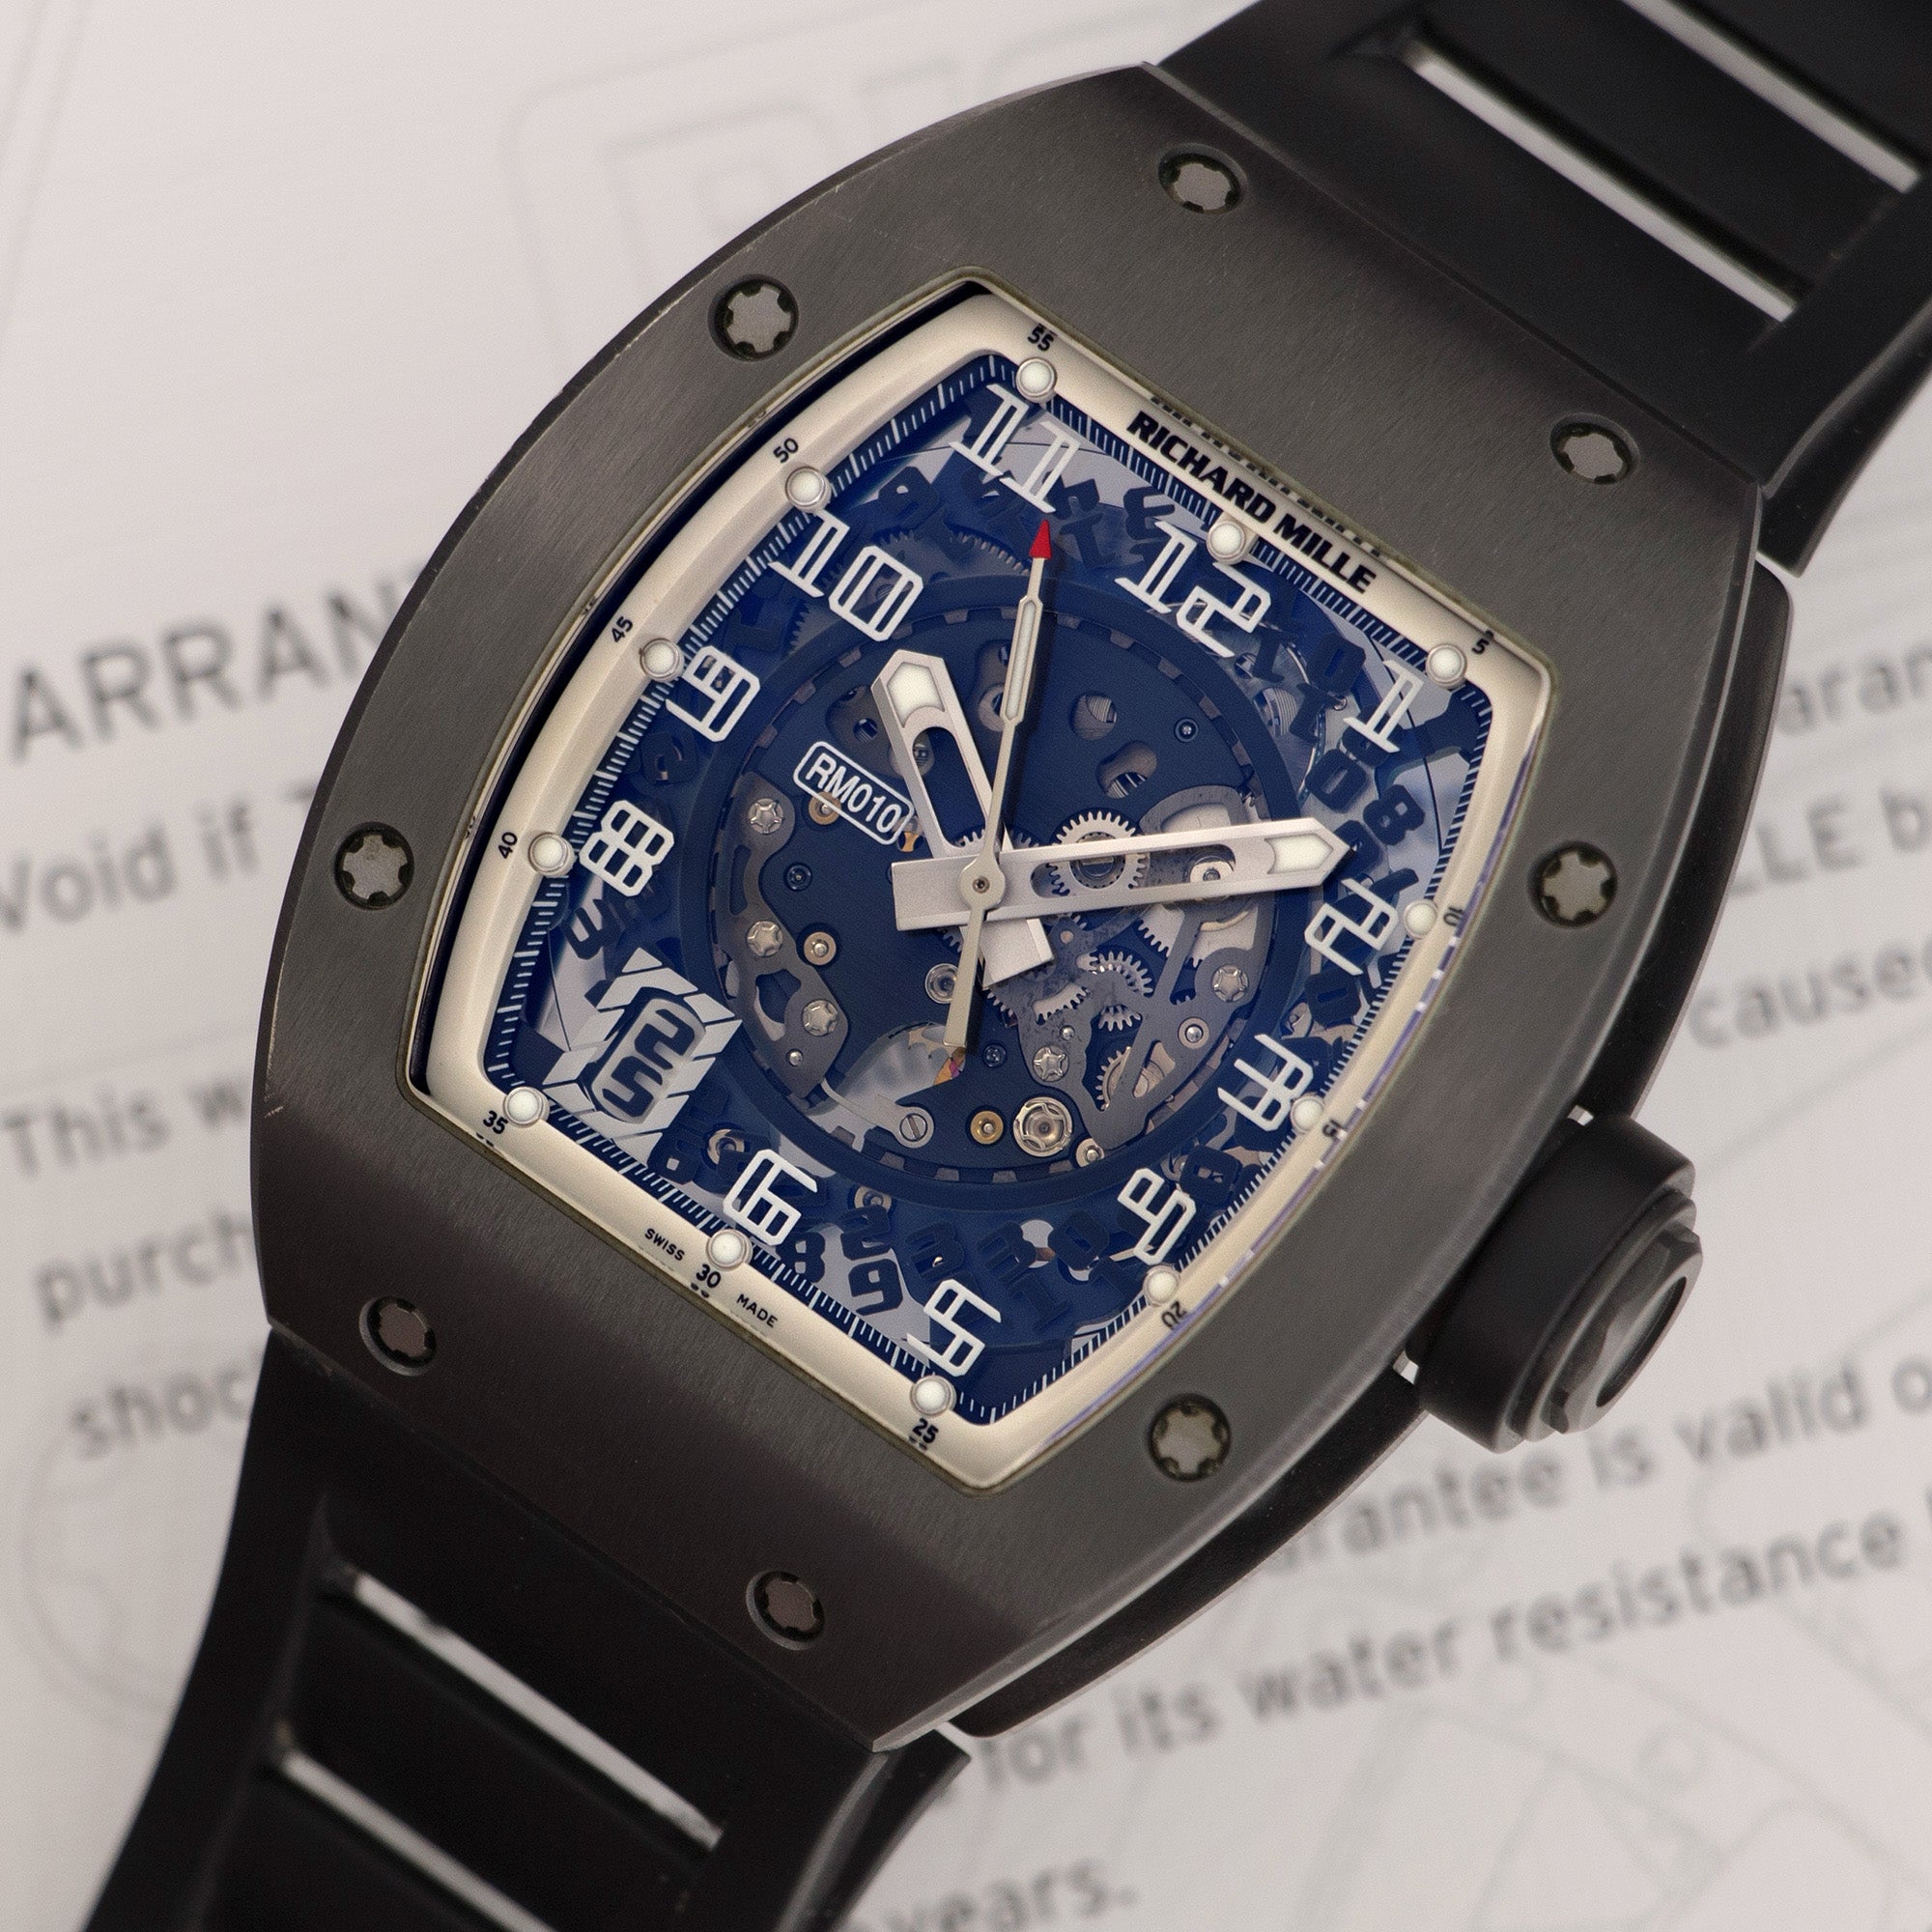 Richard Mille - Richard Mille Skeletonized Paris Boutique RM10 Watch, Limited to 10 Pieces - The Keystone Watches